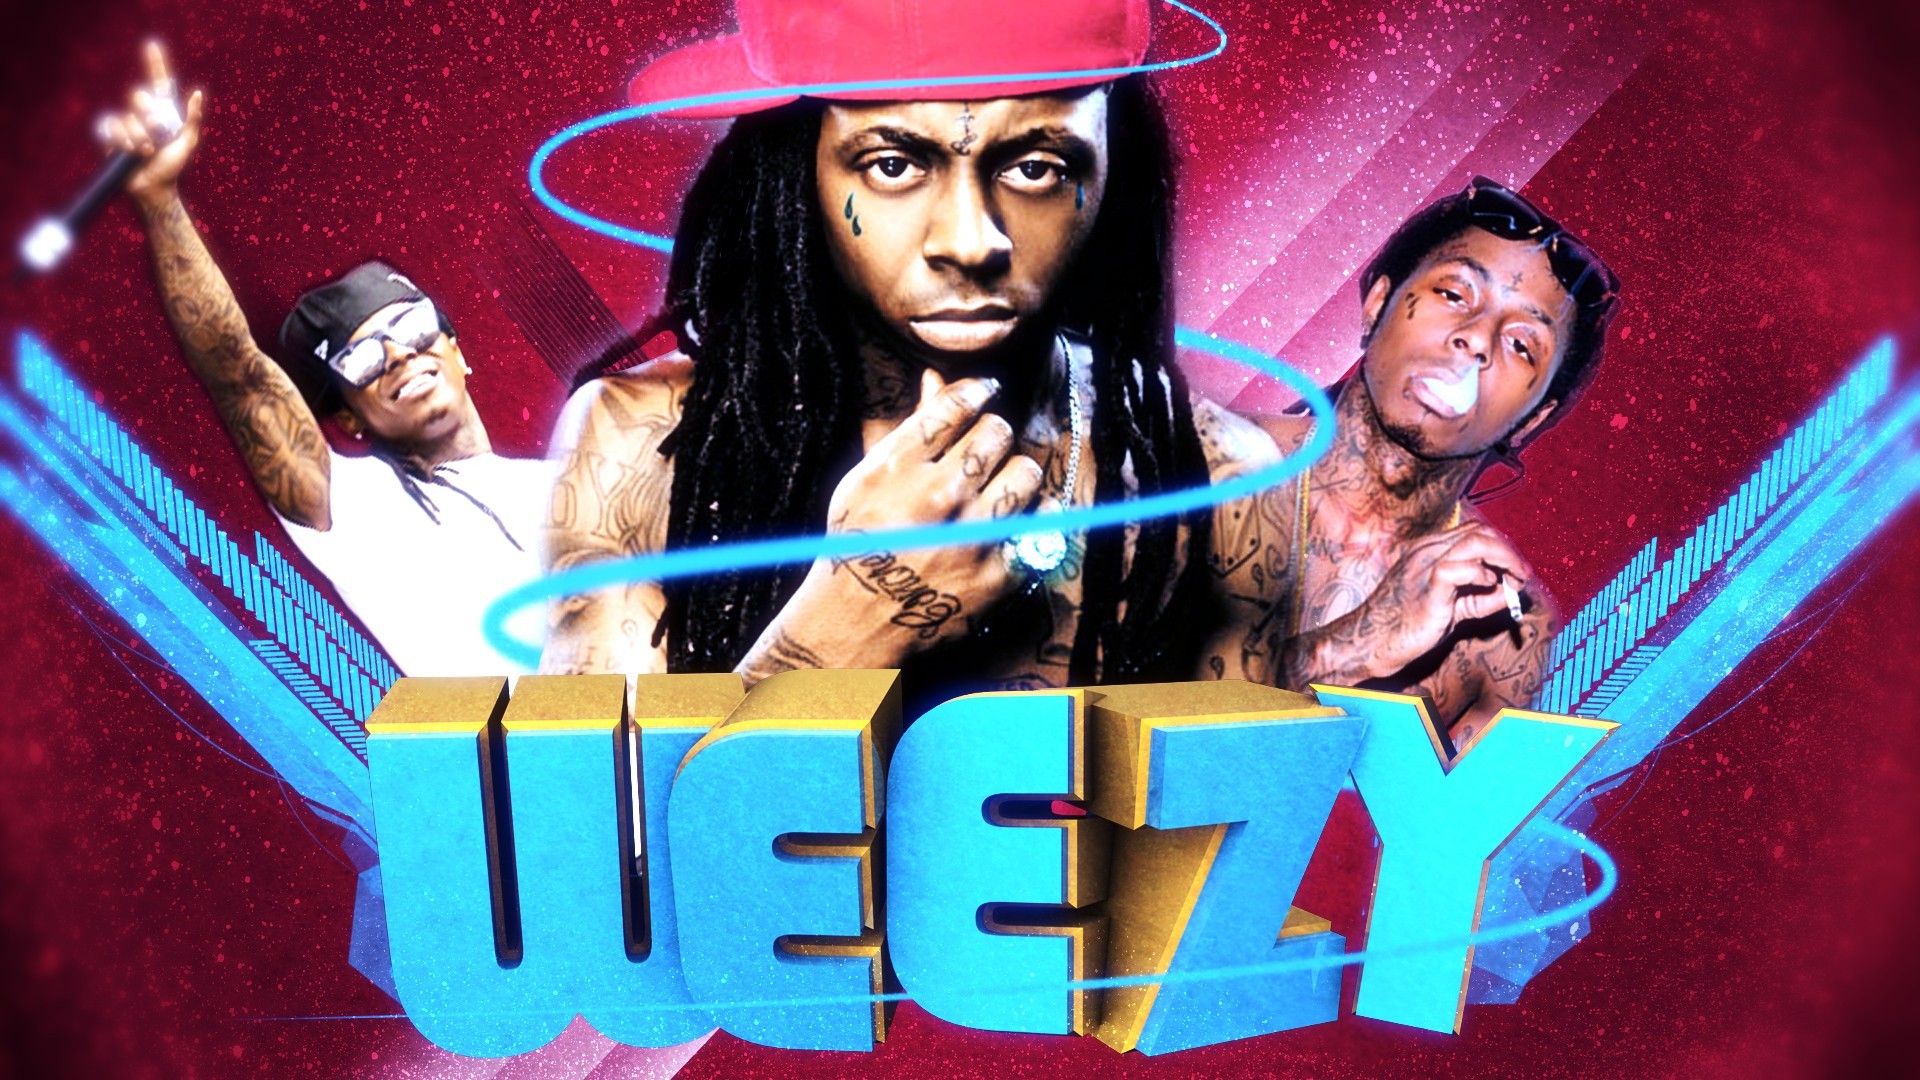 Lil Wayne HD 22 background for your phone iPhone android computer 1920x1080